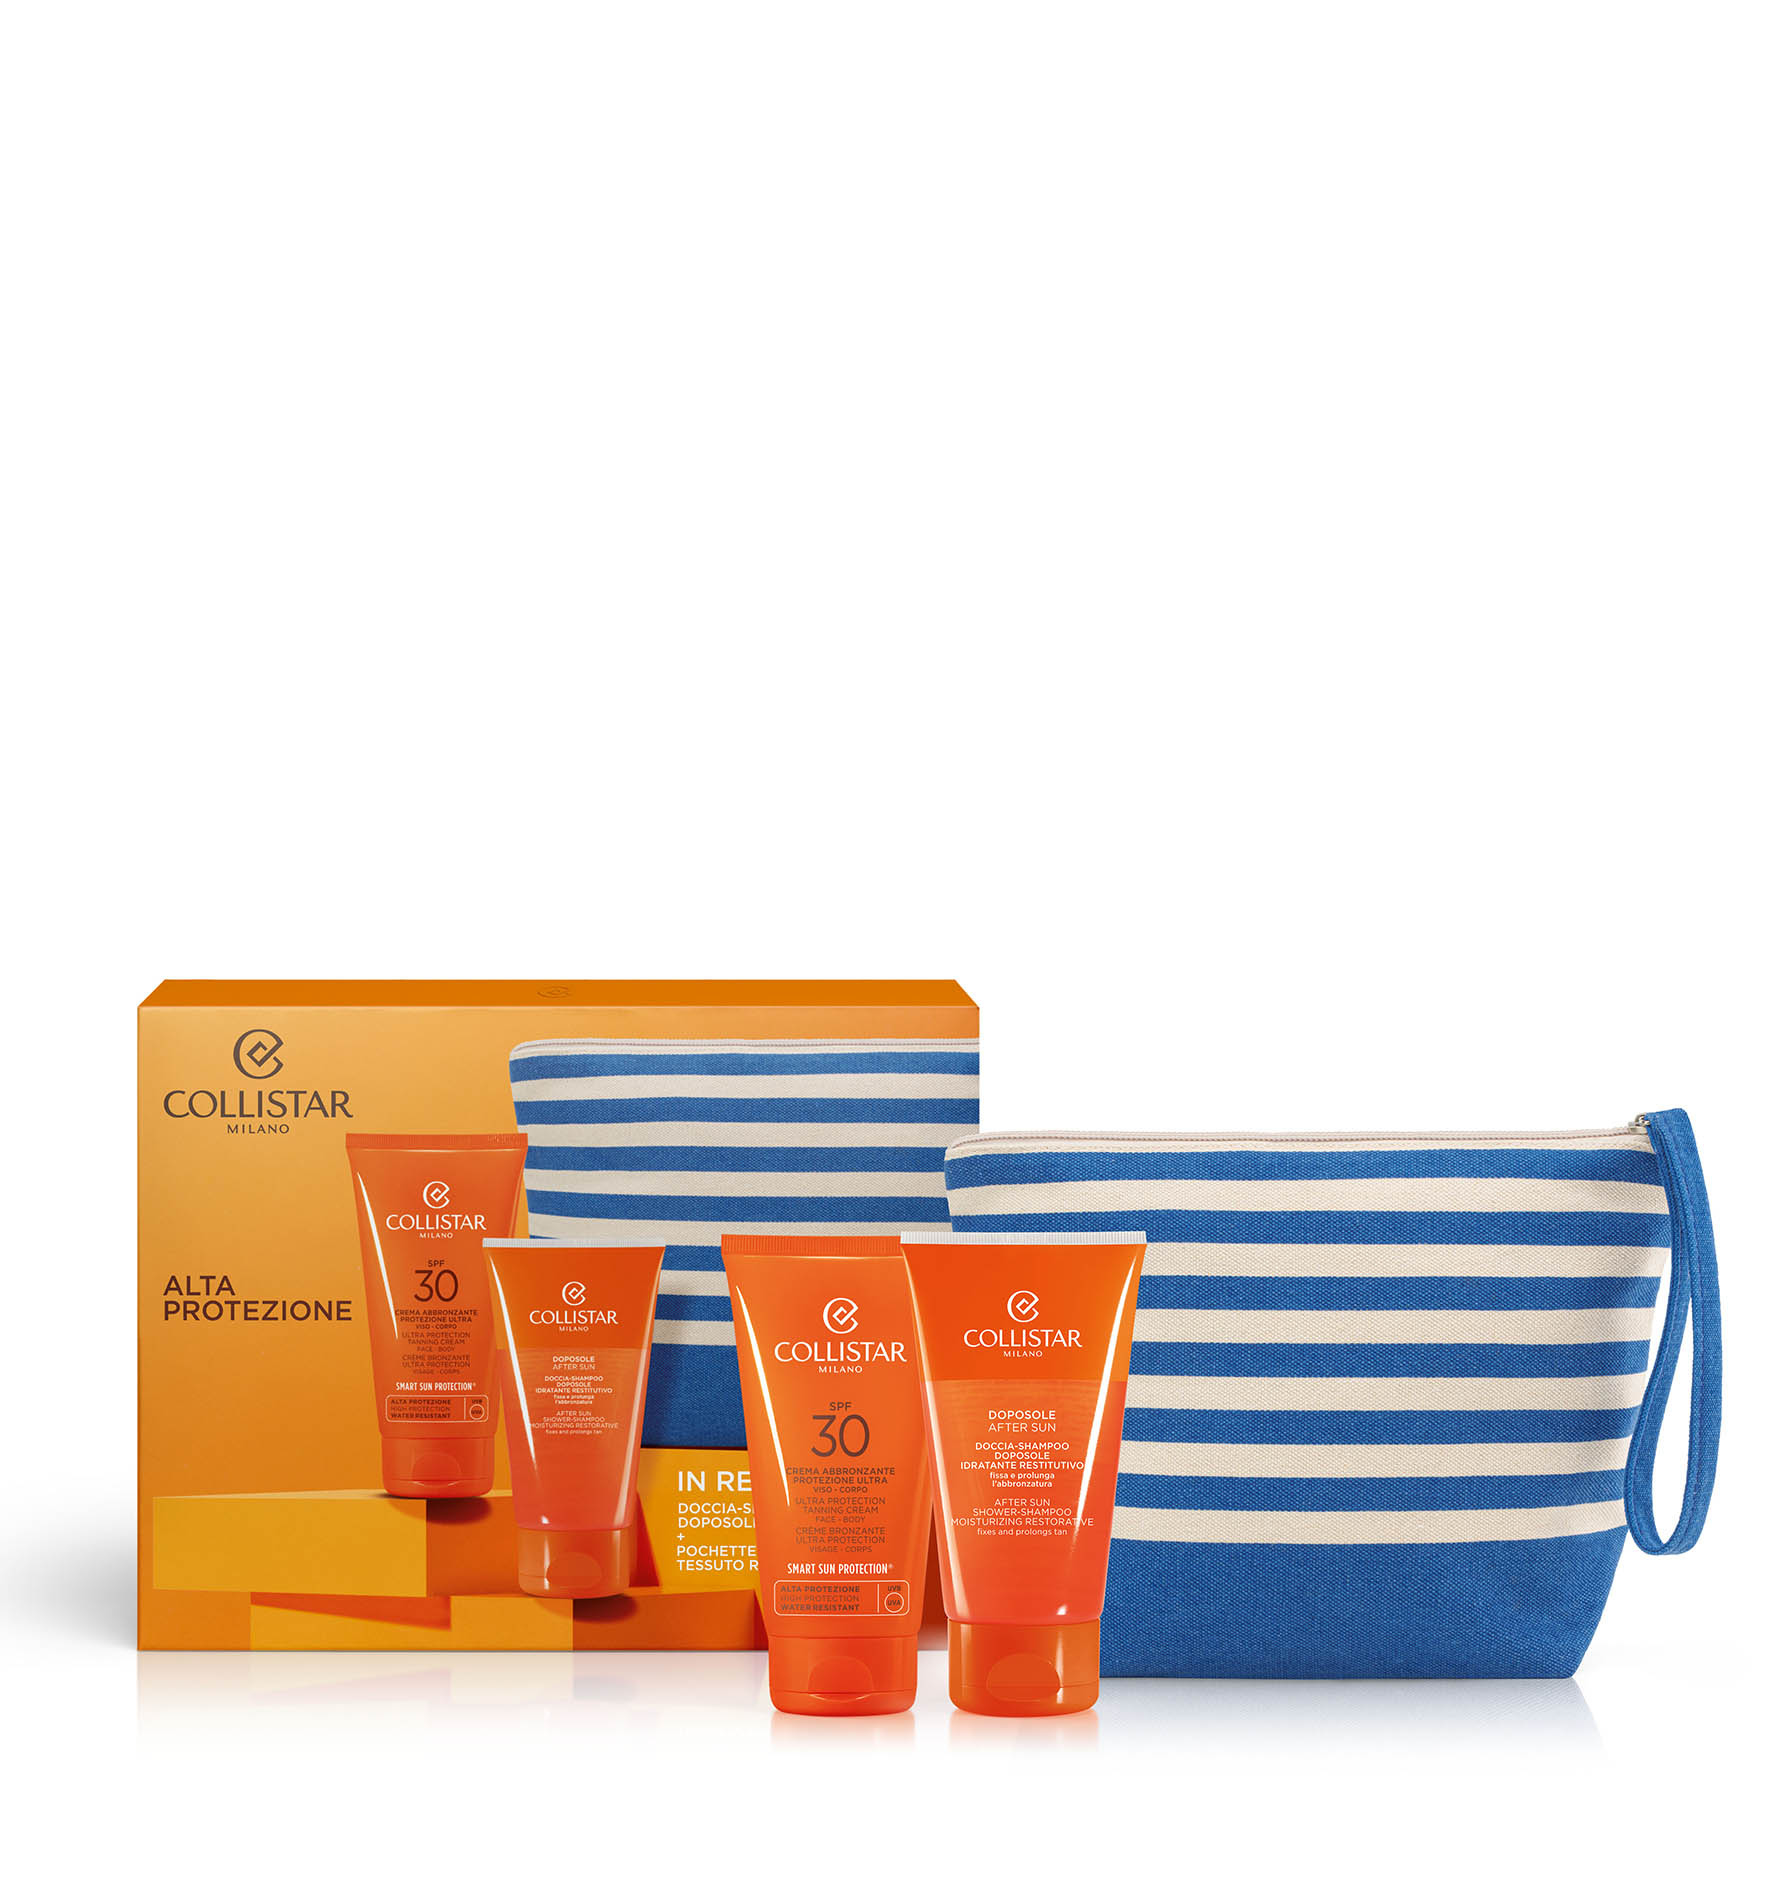 SET ULTRA PROTECTION TANNING CREAM FACE-BODY SPF 30 - NIEUW | Collistar - Shop Online Ufficiale